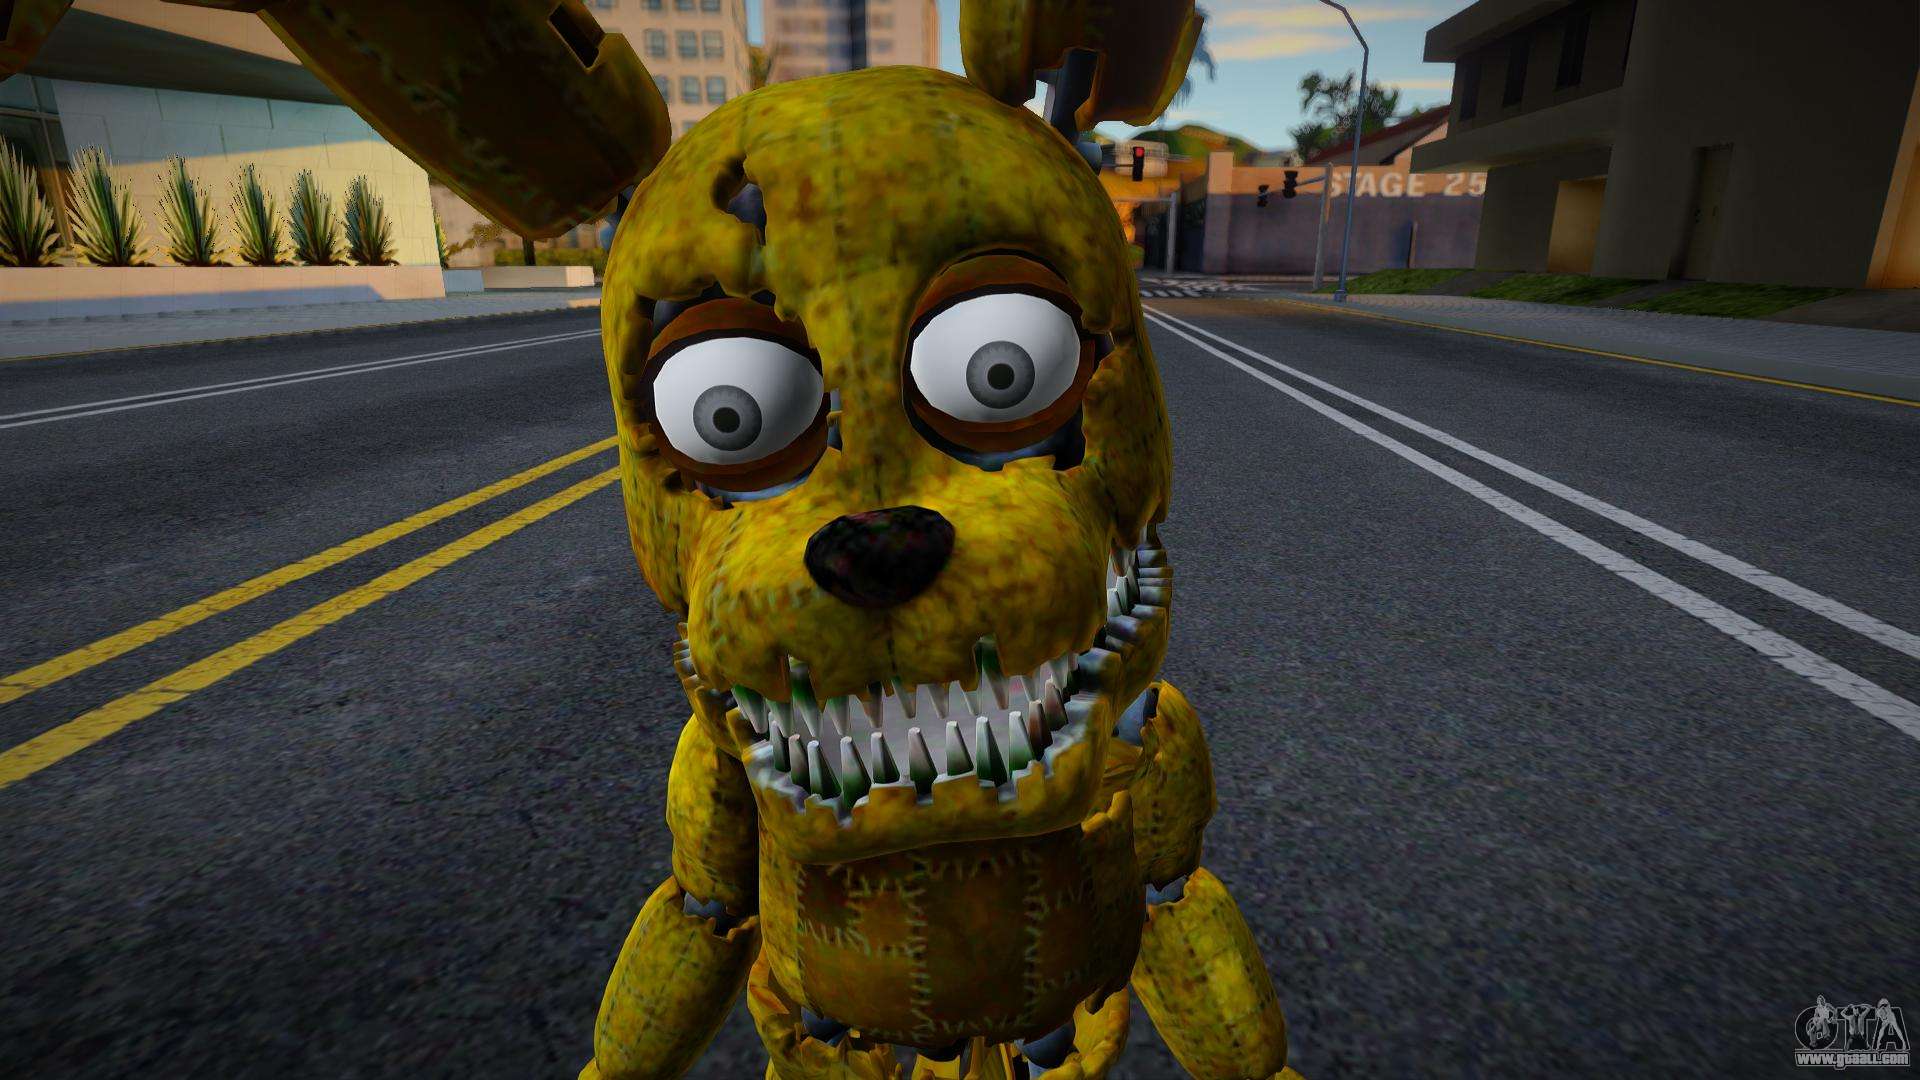 GTA San Andreas Five Nights at Freddys 4 Skin Pack [COMPLETE] with